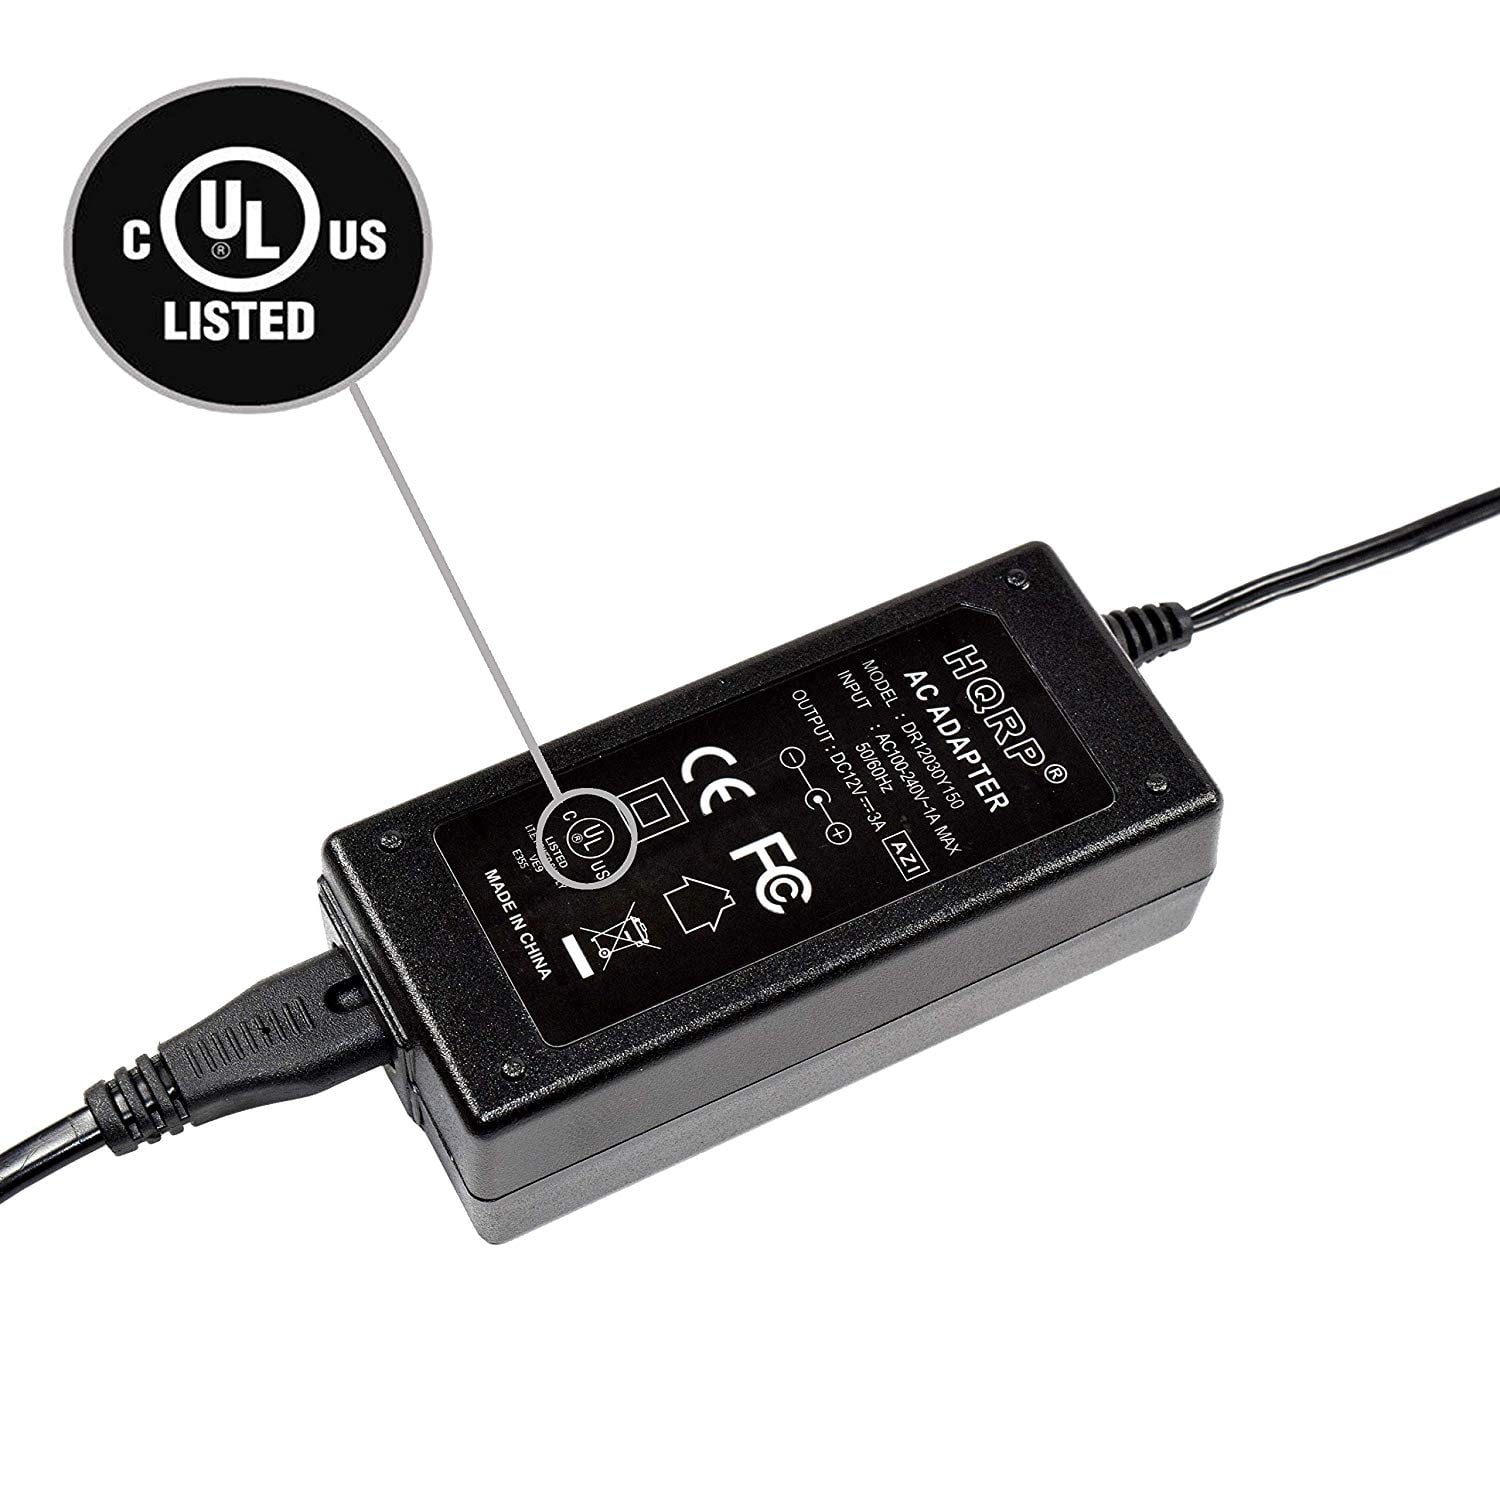 HQRP 12V Charger for Pill XL Portable 